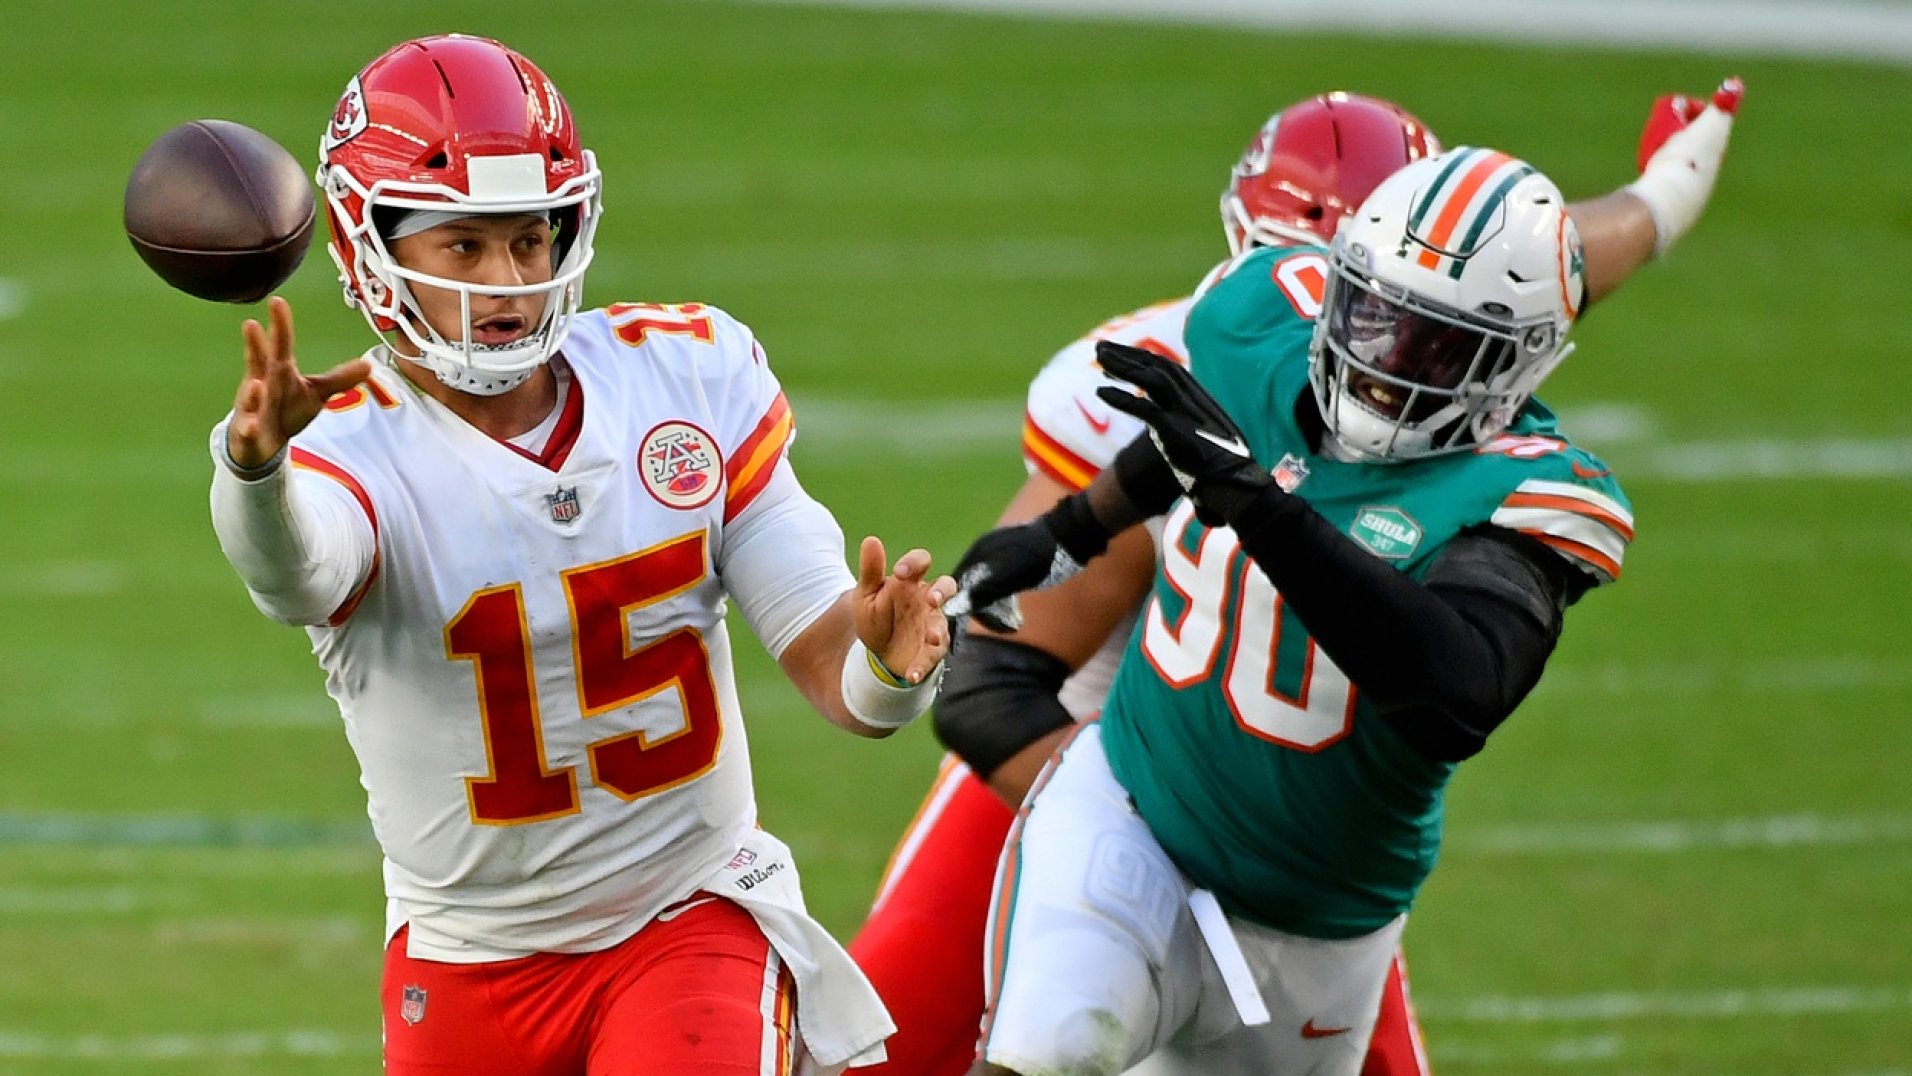 NFL Week 14 PFF ReFocused: Kansas City Chiefs 33, Miami Dolphins 27 | NFL News, Rankings and